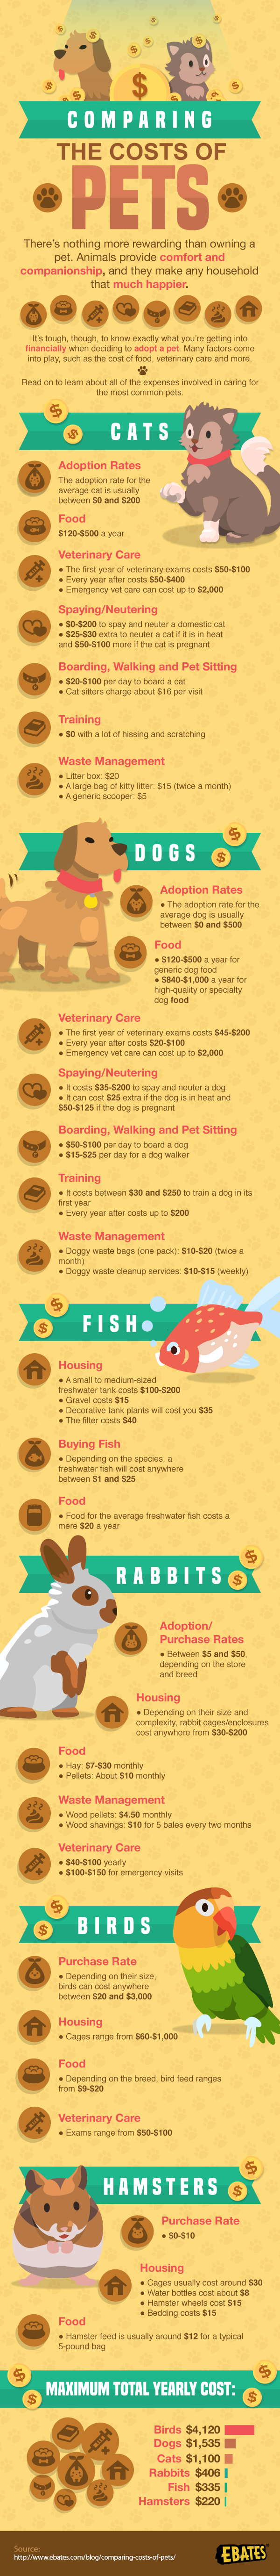 Comparing the Cost of Pets